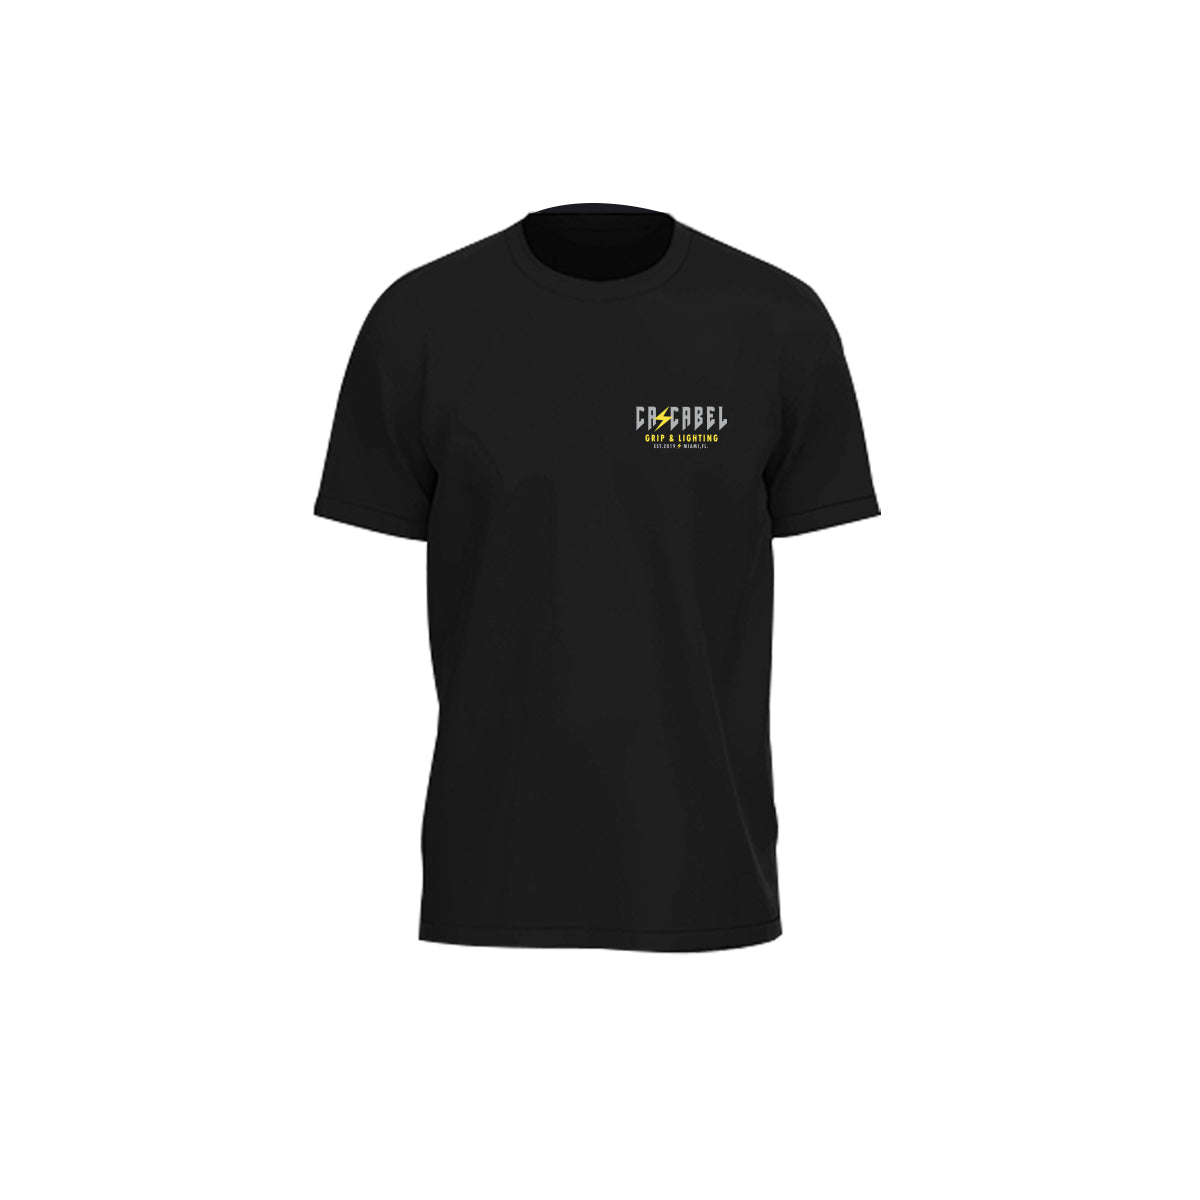 Classic 1 - Cascabel Grip and Lighting - T-Shirt